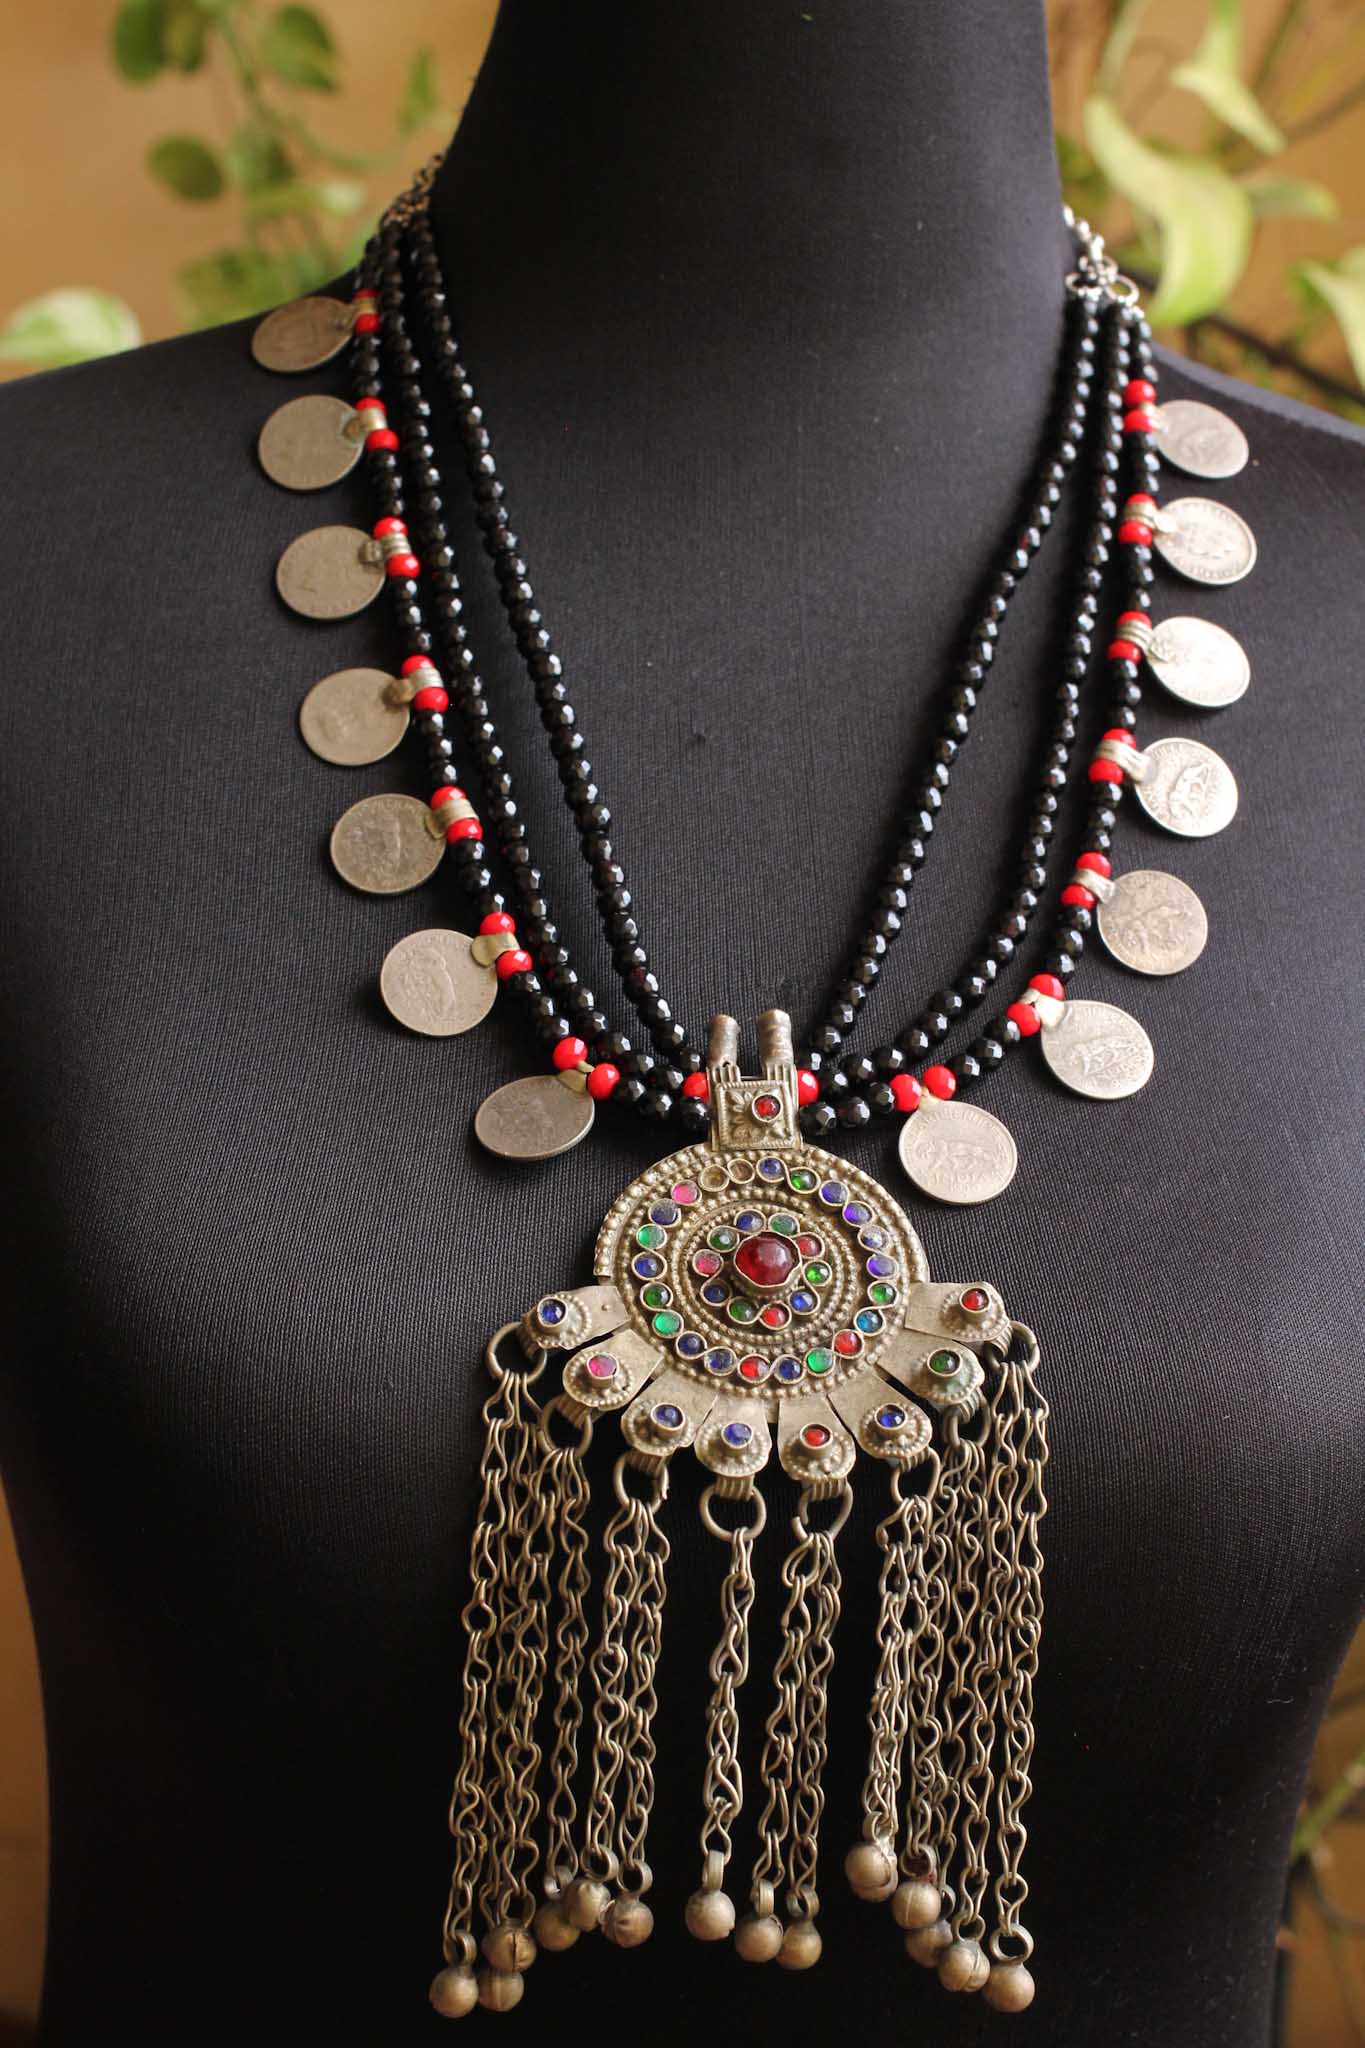 Afghan black necklace with coins NND 3423 - Art Jewelry Women ...